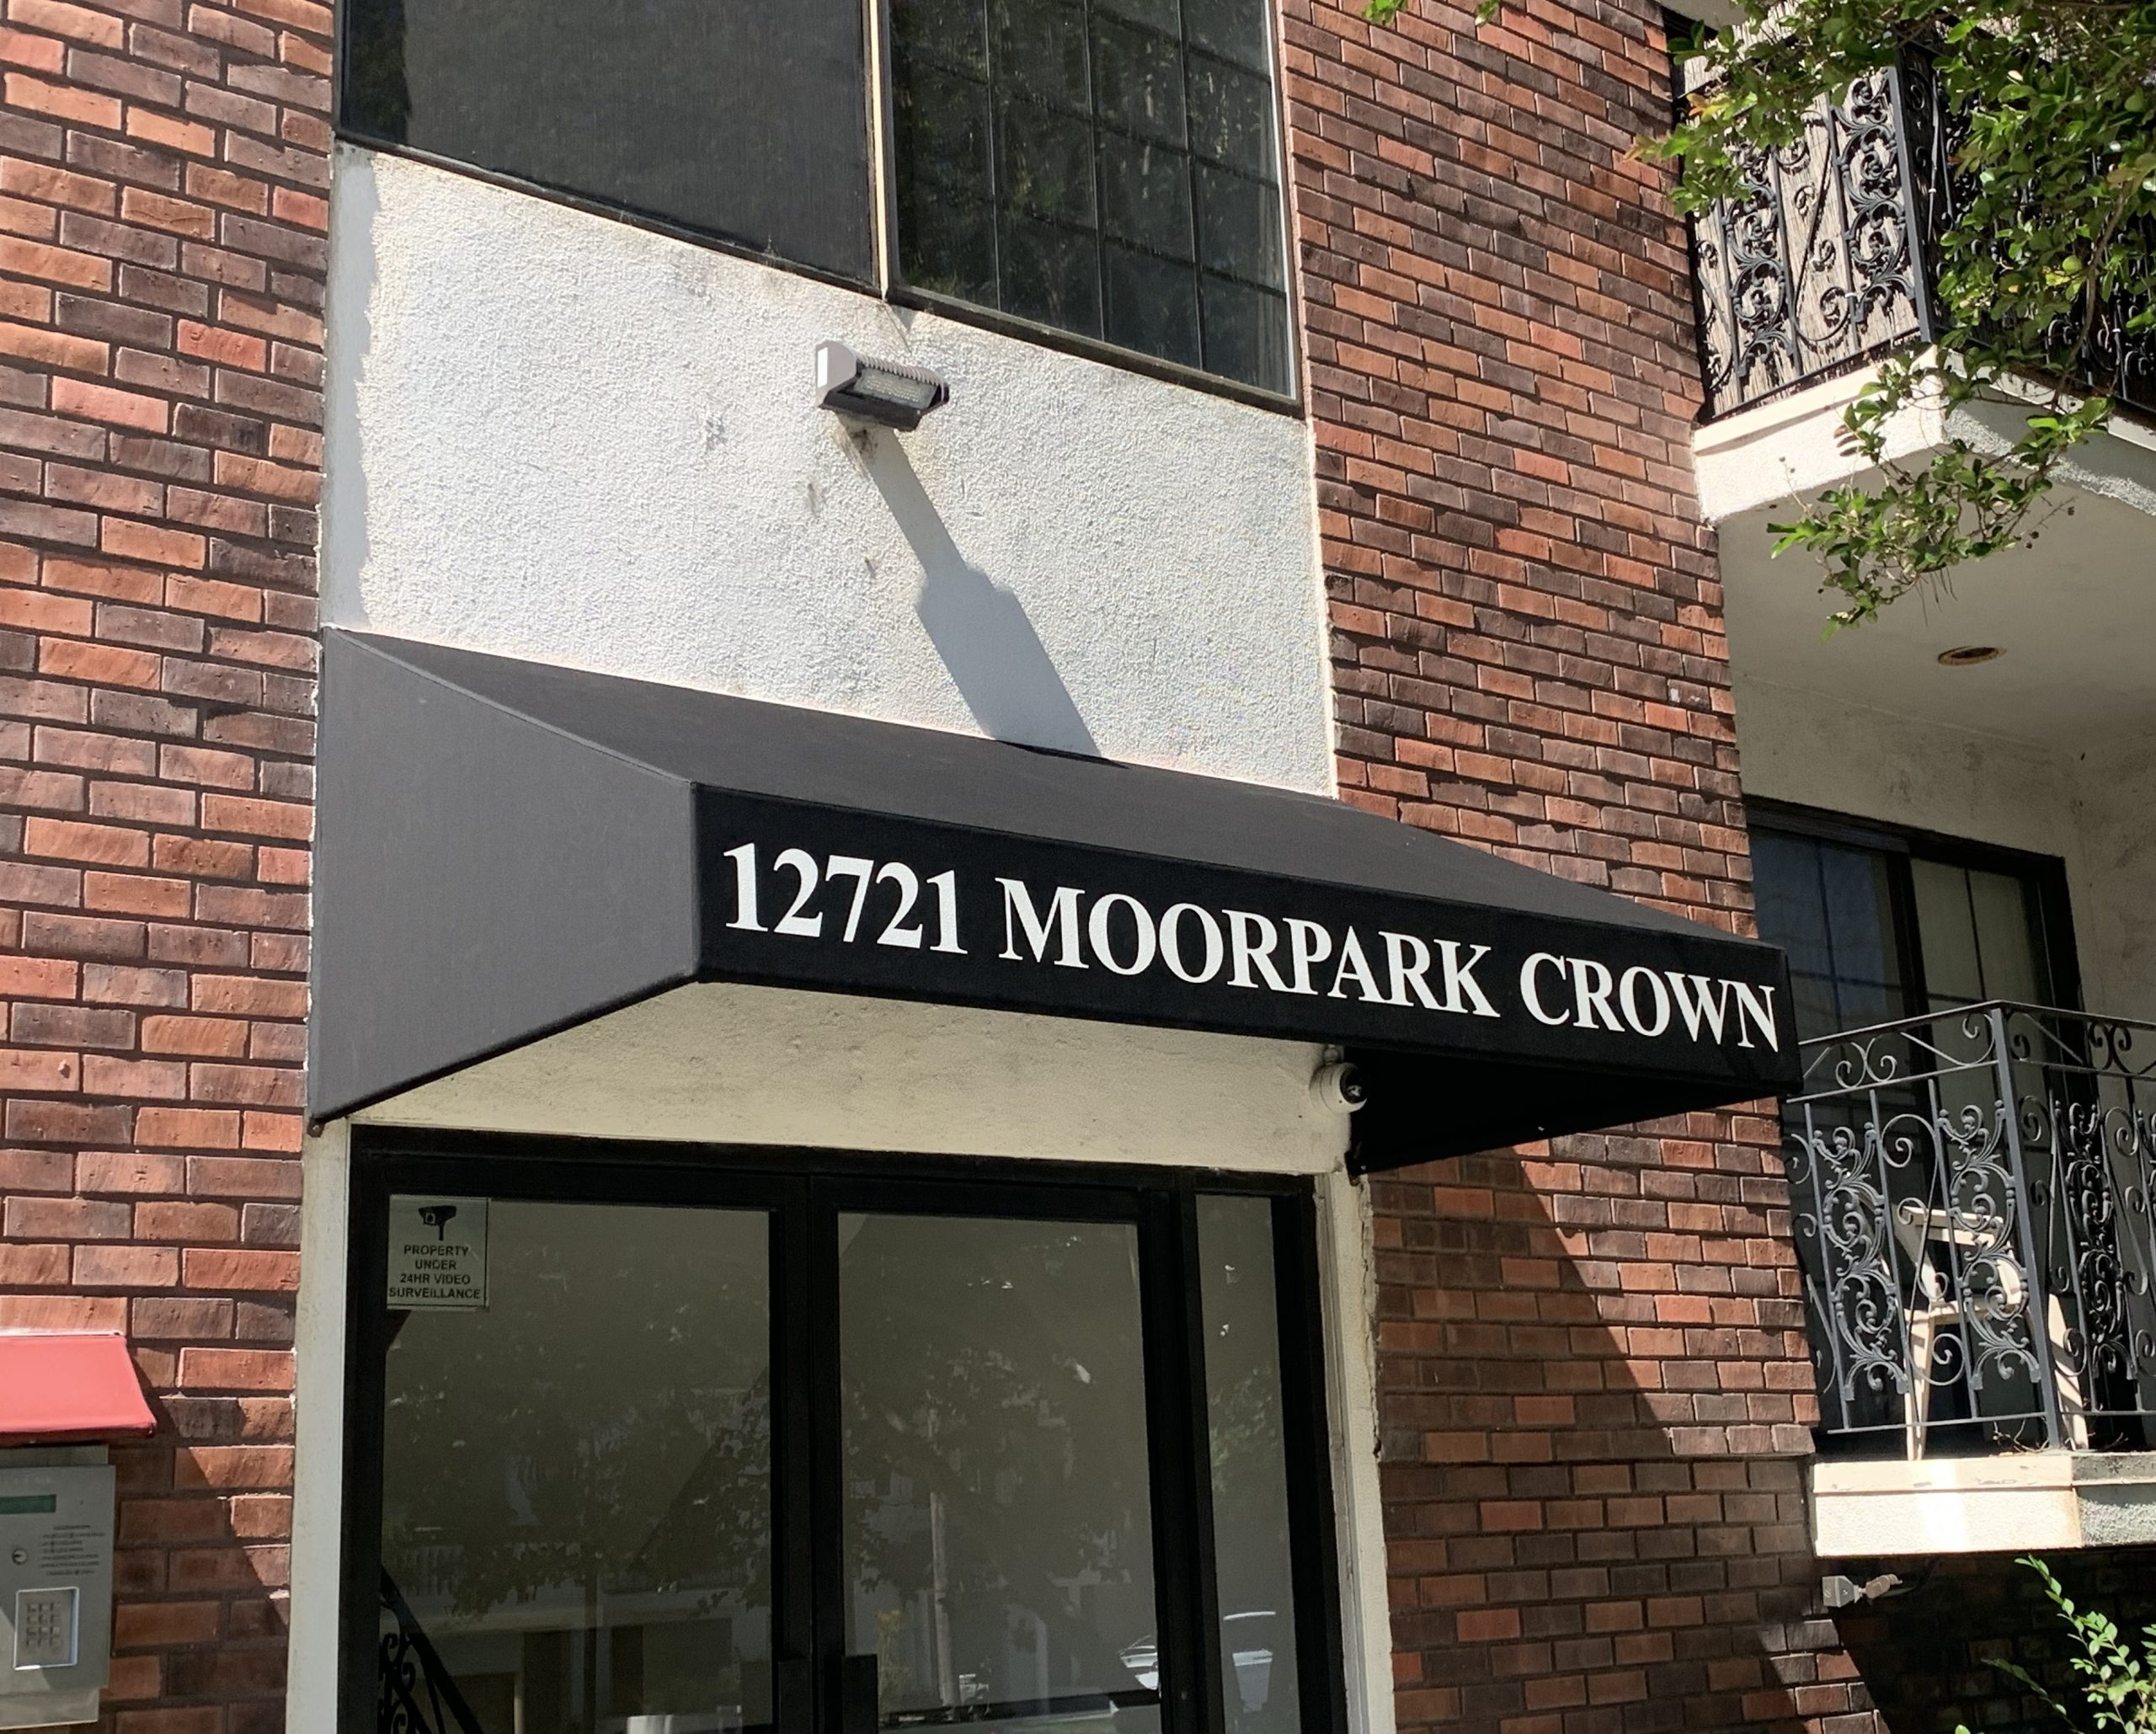 We fabricated and installed this apartment entrance awning sign for the Moorpark Crown Apartments in Studio City.